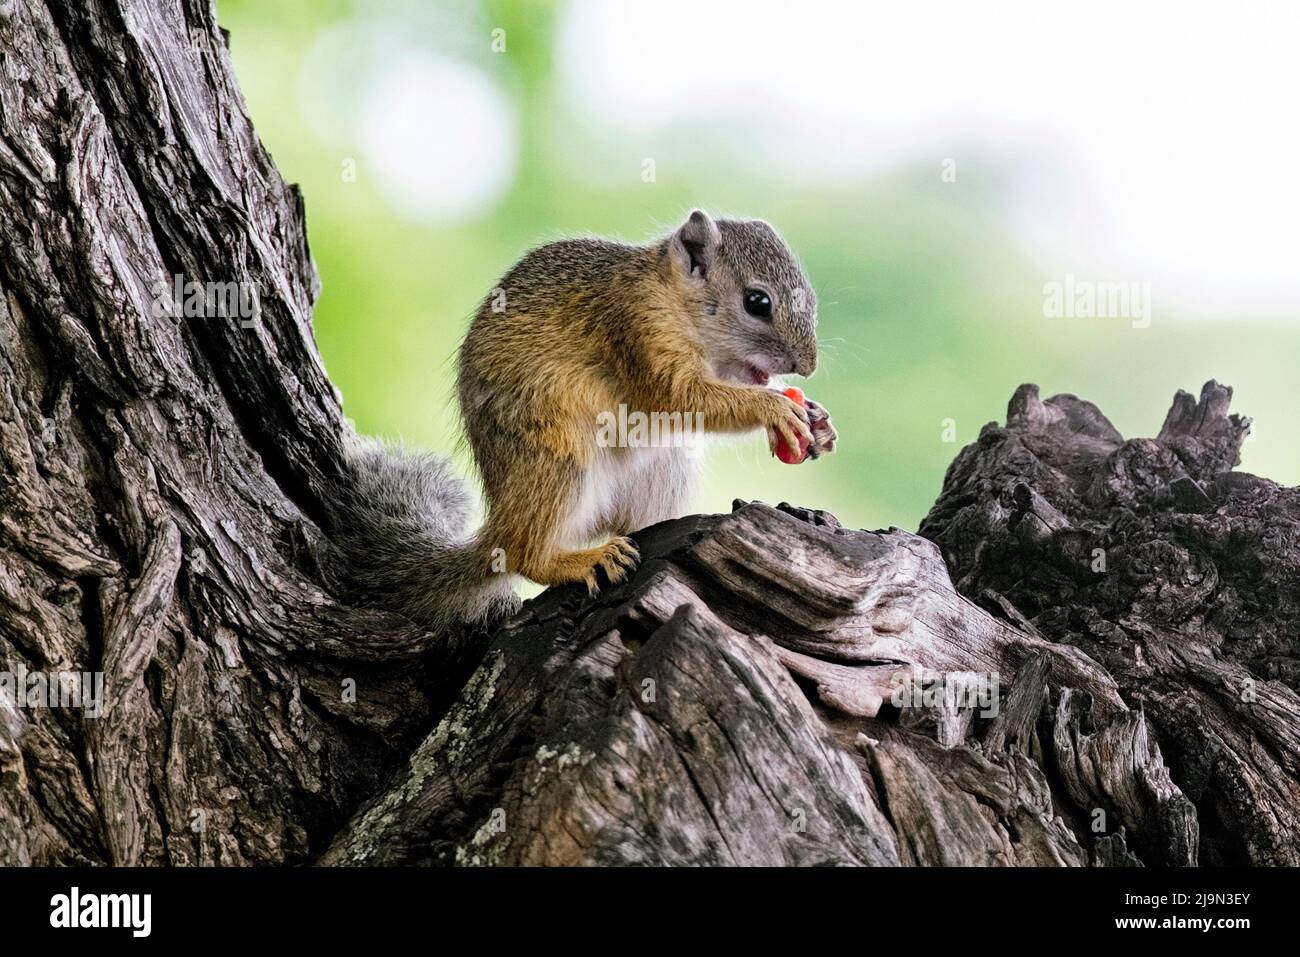 Smith's bush squirrel / yellow-footed squirrel / tree squirrel (Paraxerus cepapi), African bush squirrel native to southern Africa Stock Photo